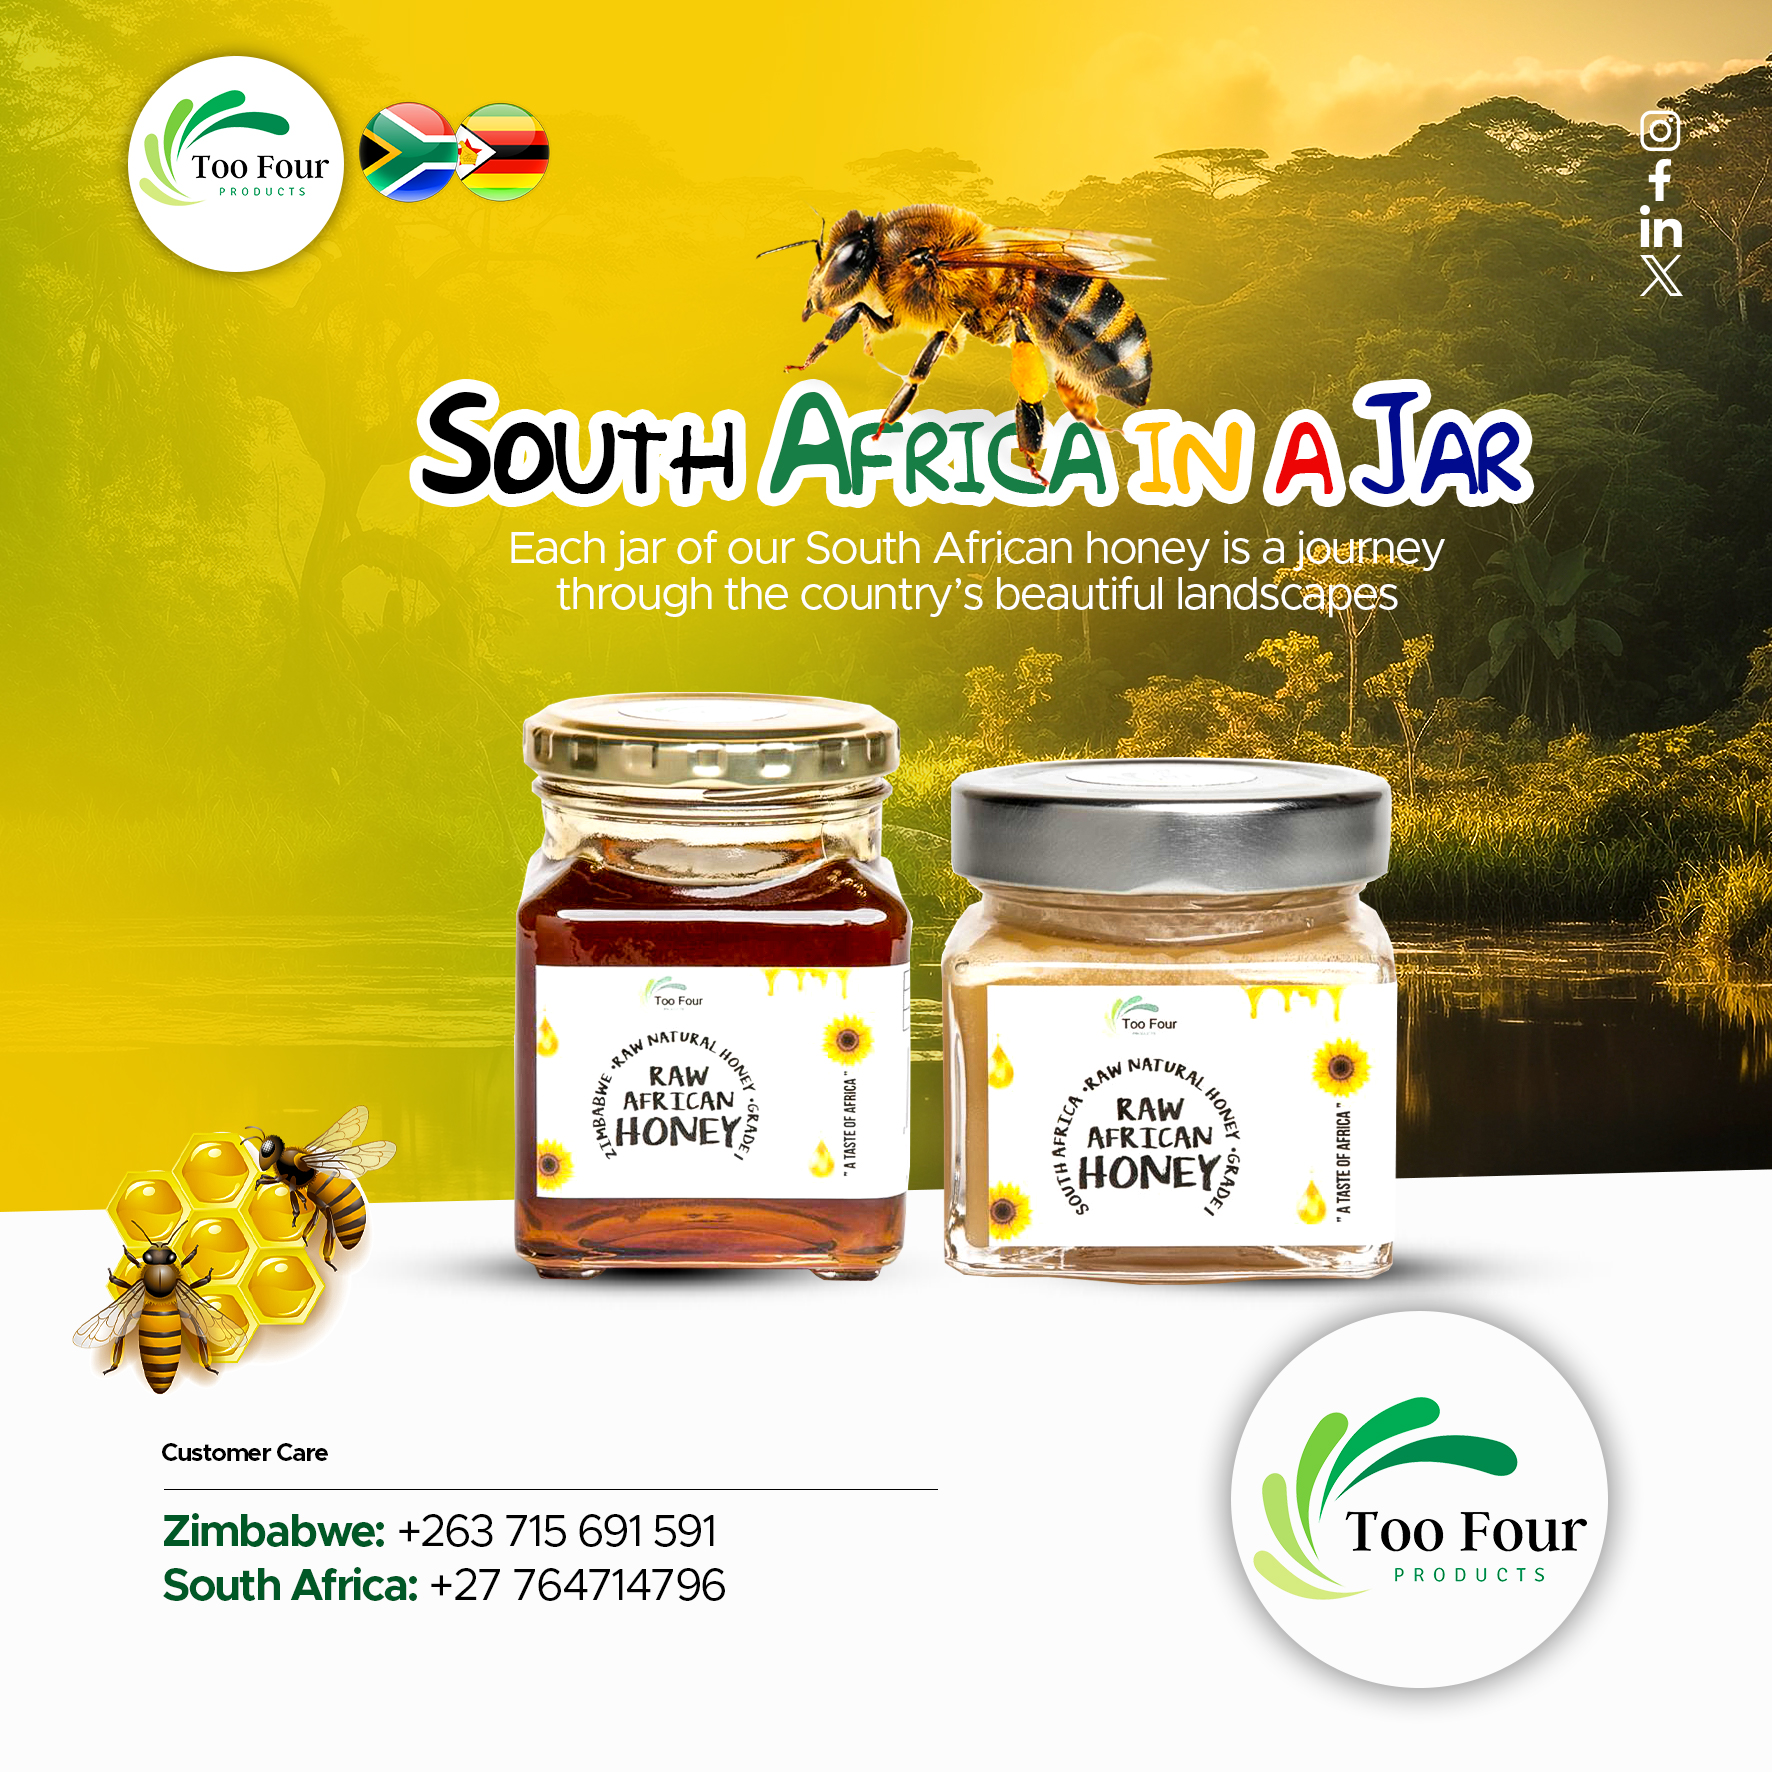 Post 4 South Africa in a Jar